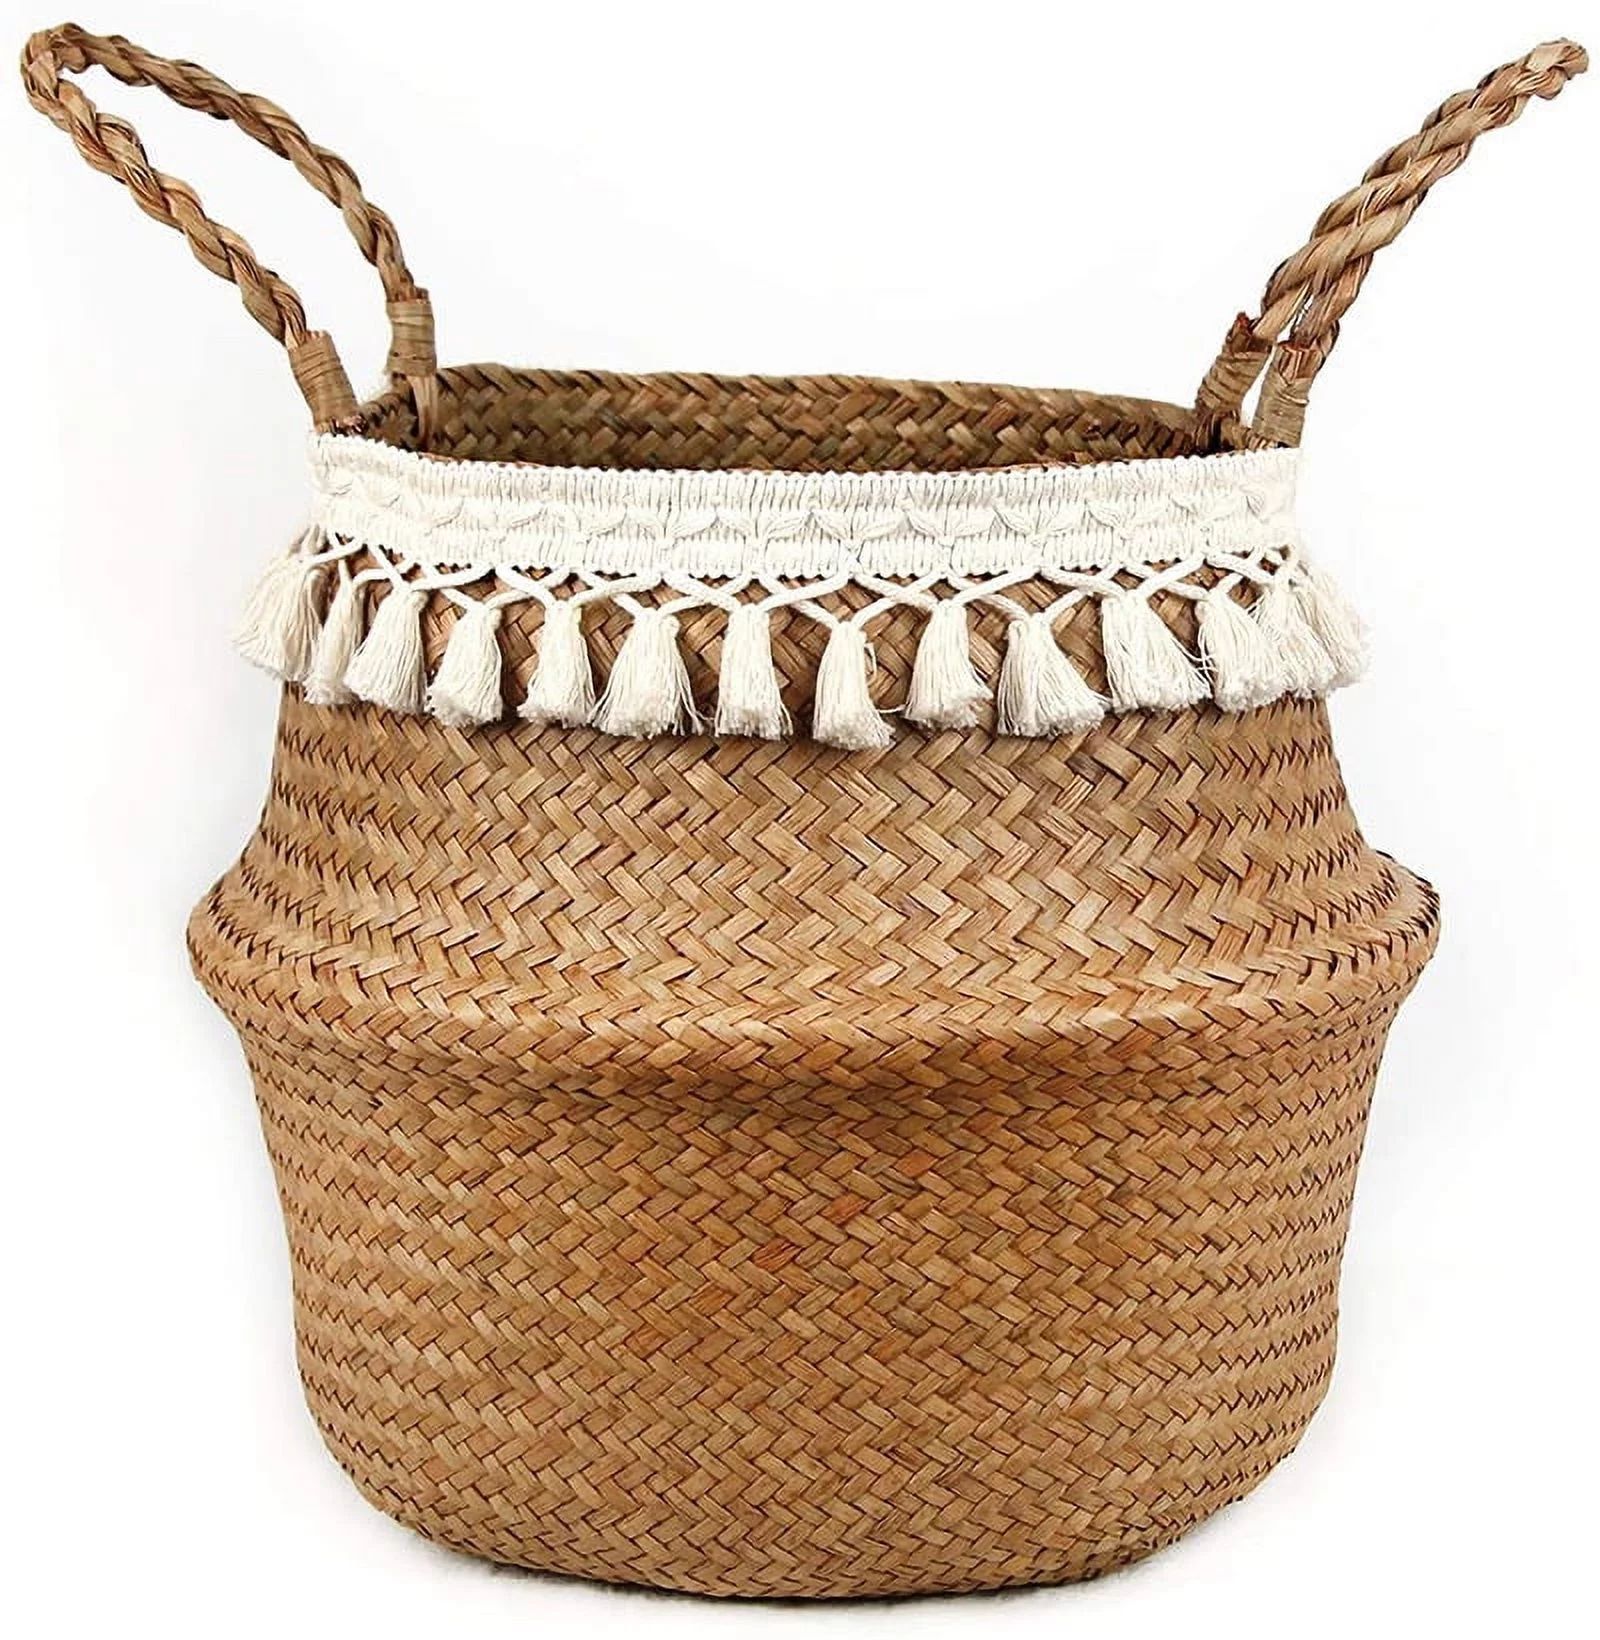 Woven Seagrass Plant Basket - Wicker Belly Basket Planter Indoor with Plastic Liner and Handles, ... | Walmart (US)